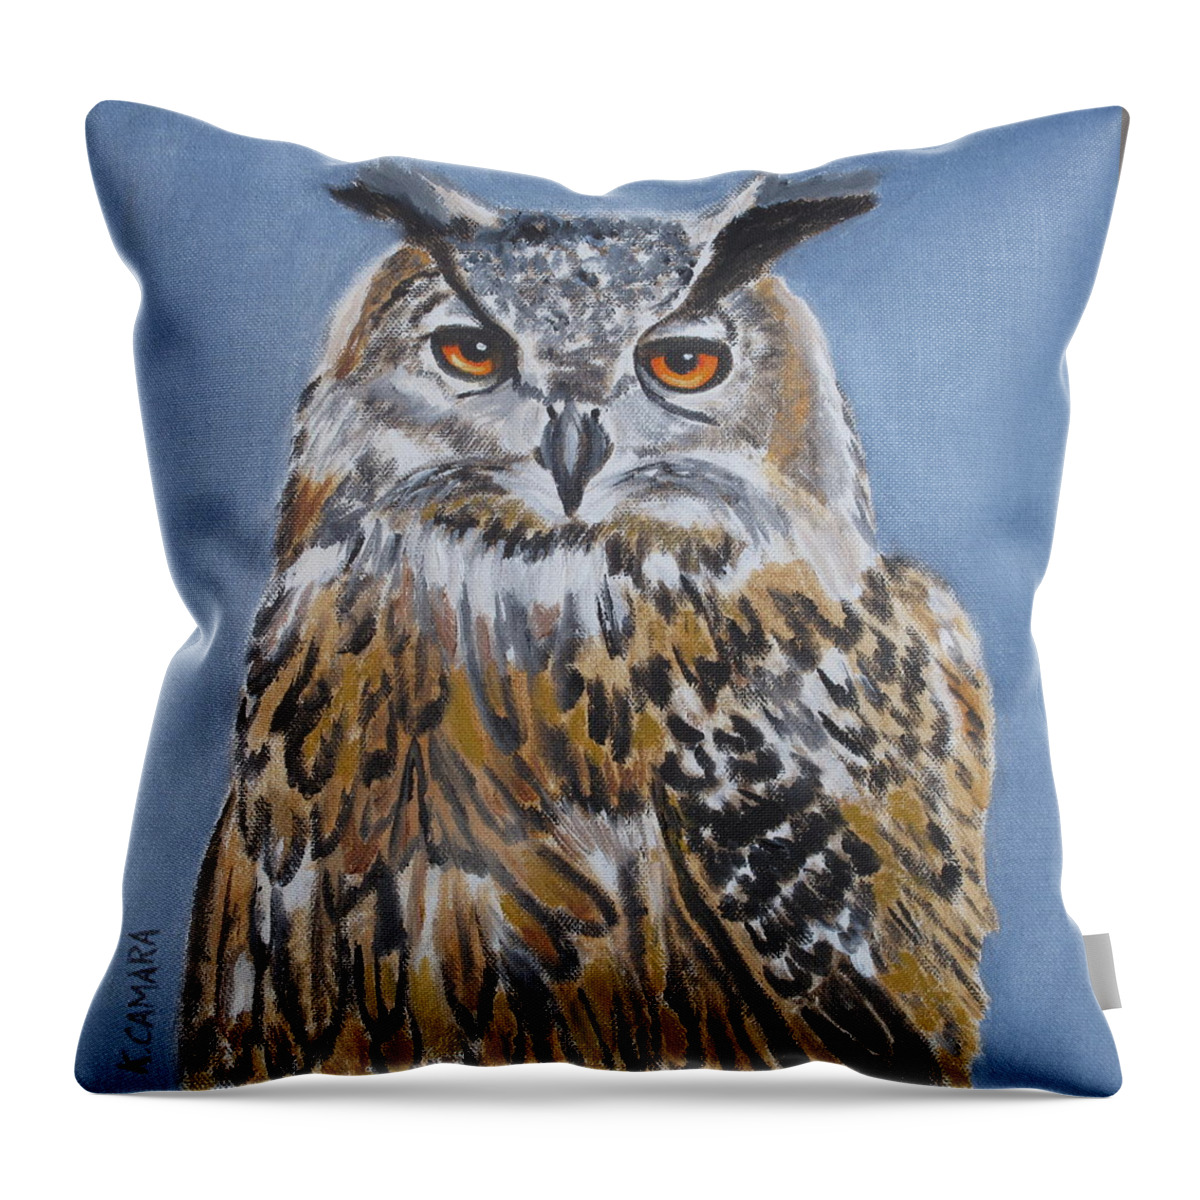 Pets Throw Pillow featuring the painting Owl Orange Eyes by Kathie Camara